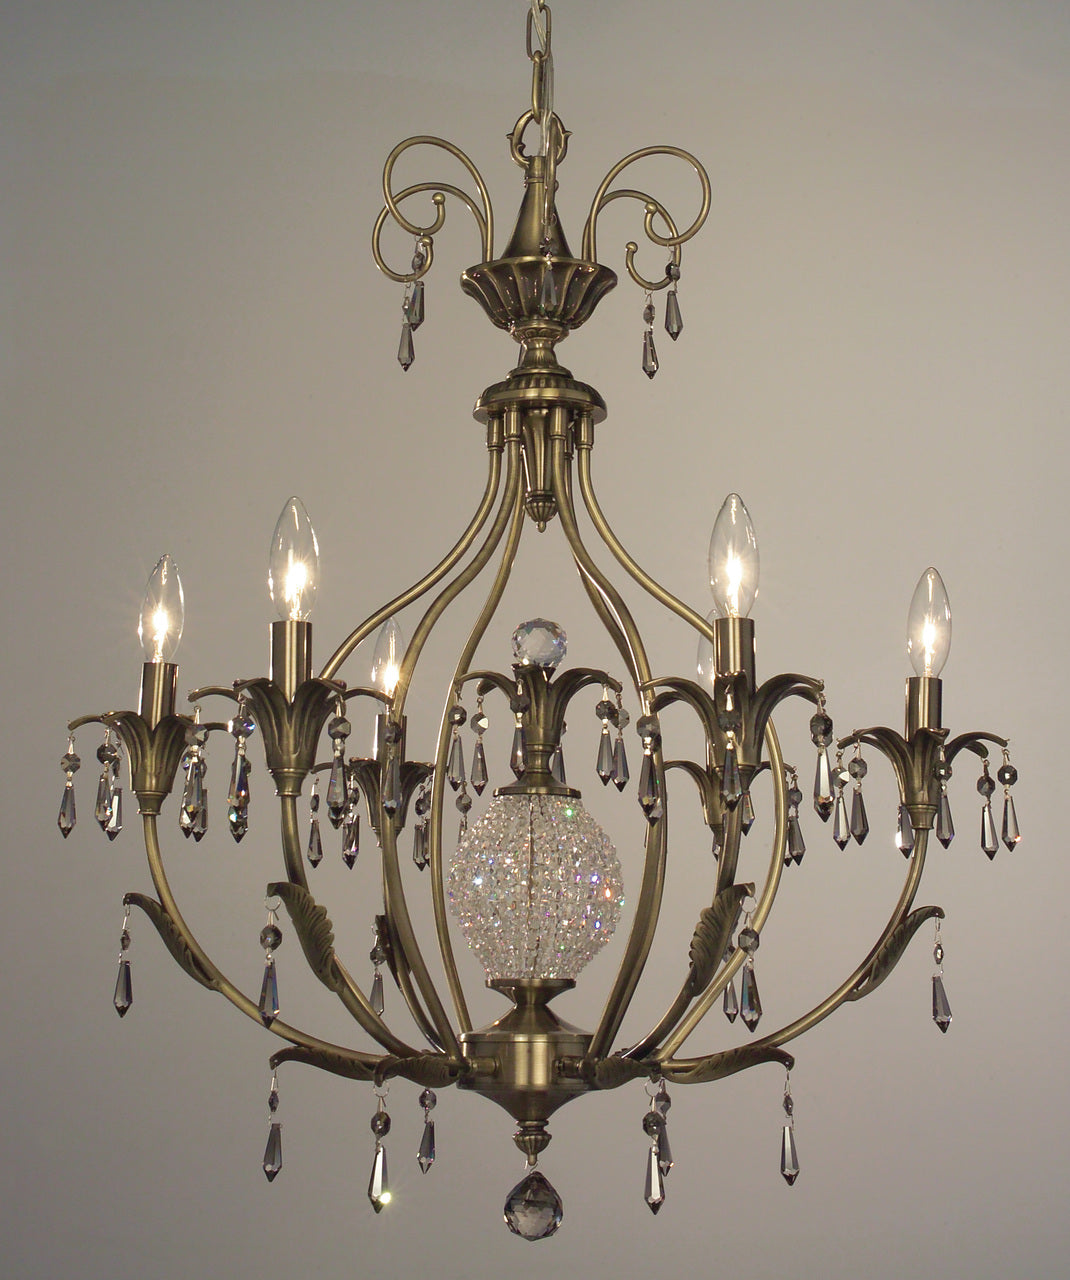 Classic Lighting 16116 ABR SMK Sharon Crystal Chandelier in Antique Brass